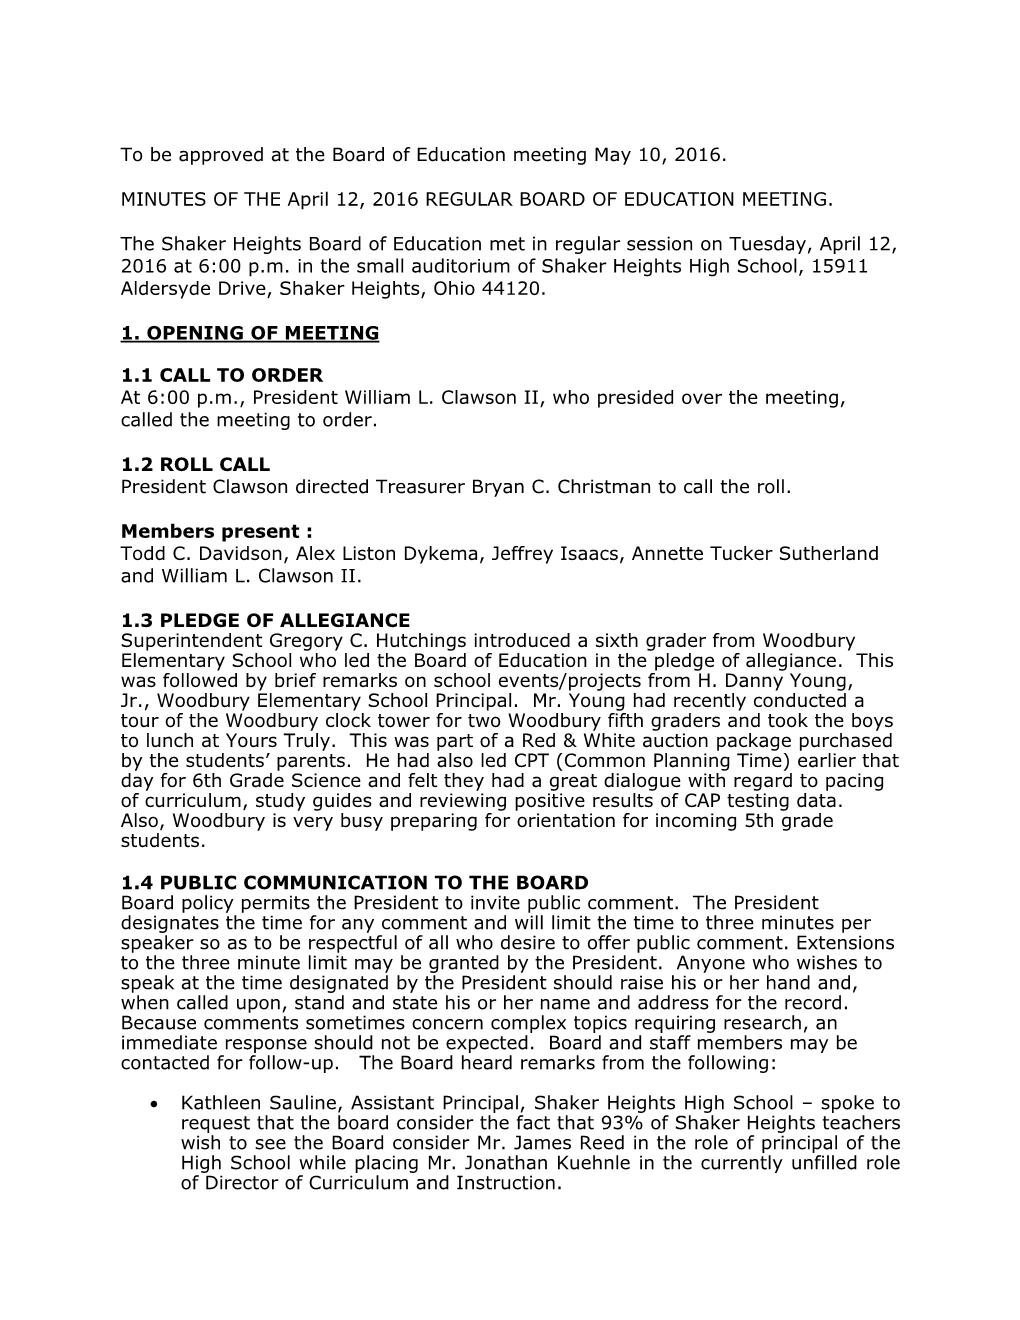 To Be Approved at the Board of Education Meeting May 10, 2016